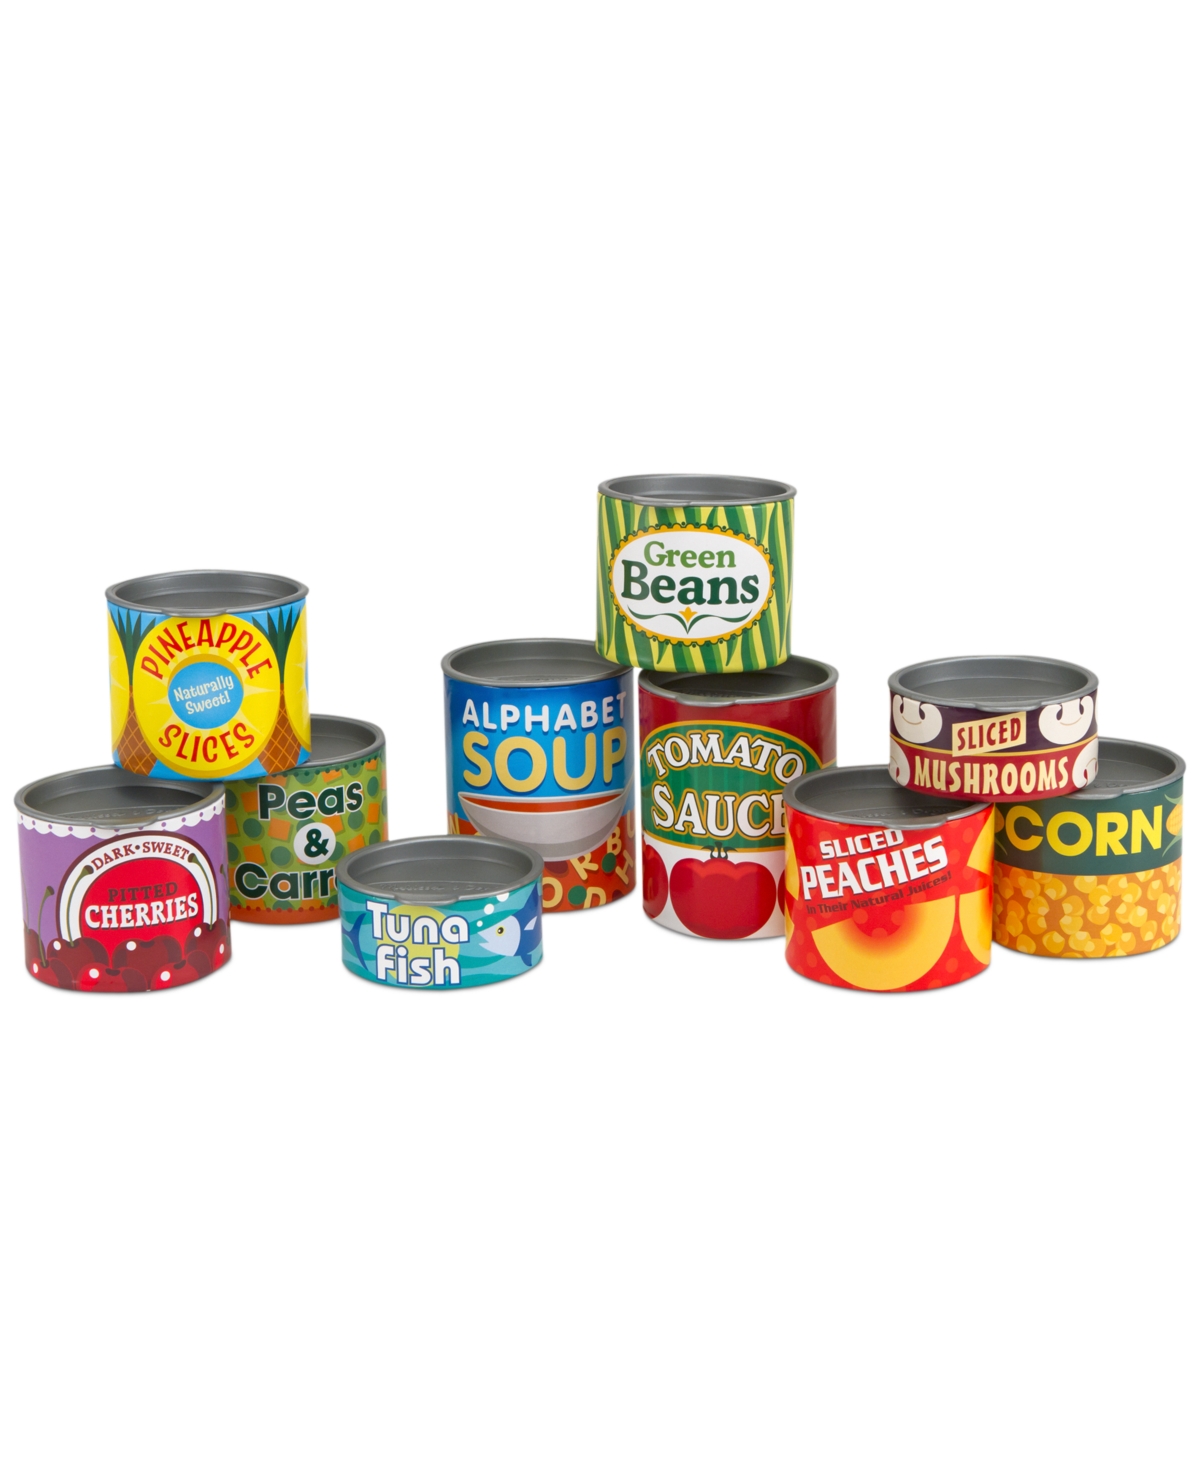 Melissa & Doug Kids Toy, Let's Play House Grocery Cans In Multi